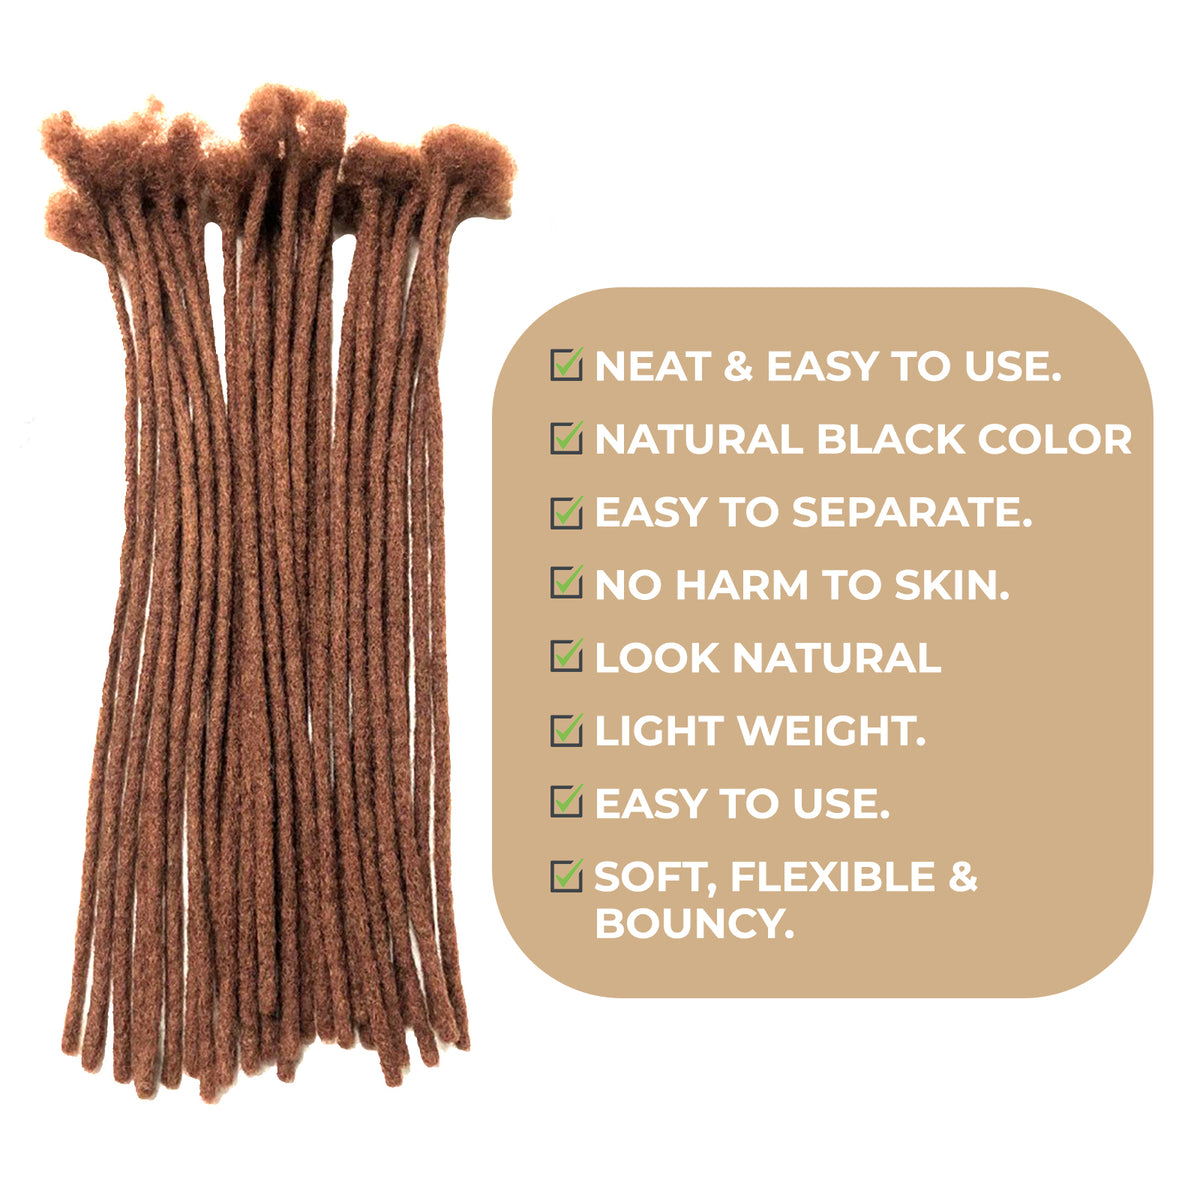 100% Human Hair Dreadlock Extensions 16Inch 10 Strands Handmade Natural Loc Extensions Human Hair Bundle Dreads Extensions For Woman & Men Can Be Dyed/Bleached (Brown/33, 16inch length 0.8 cm Width)